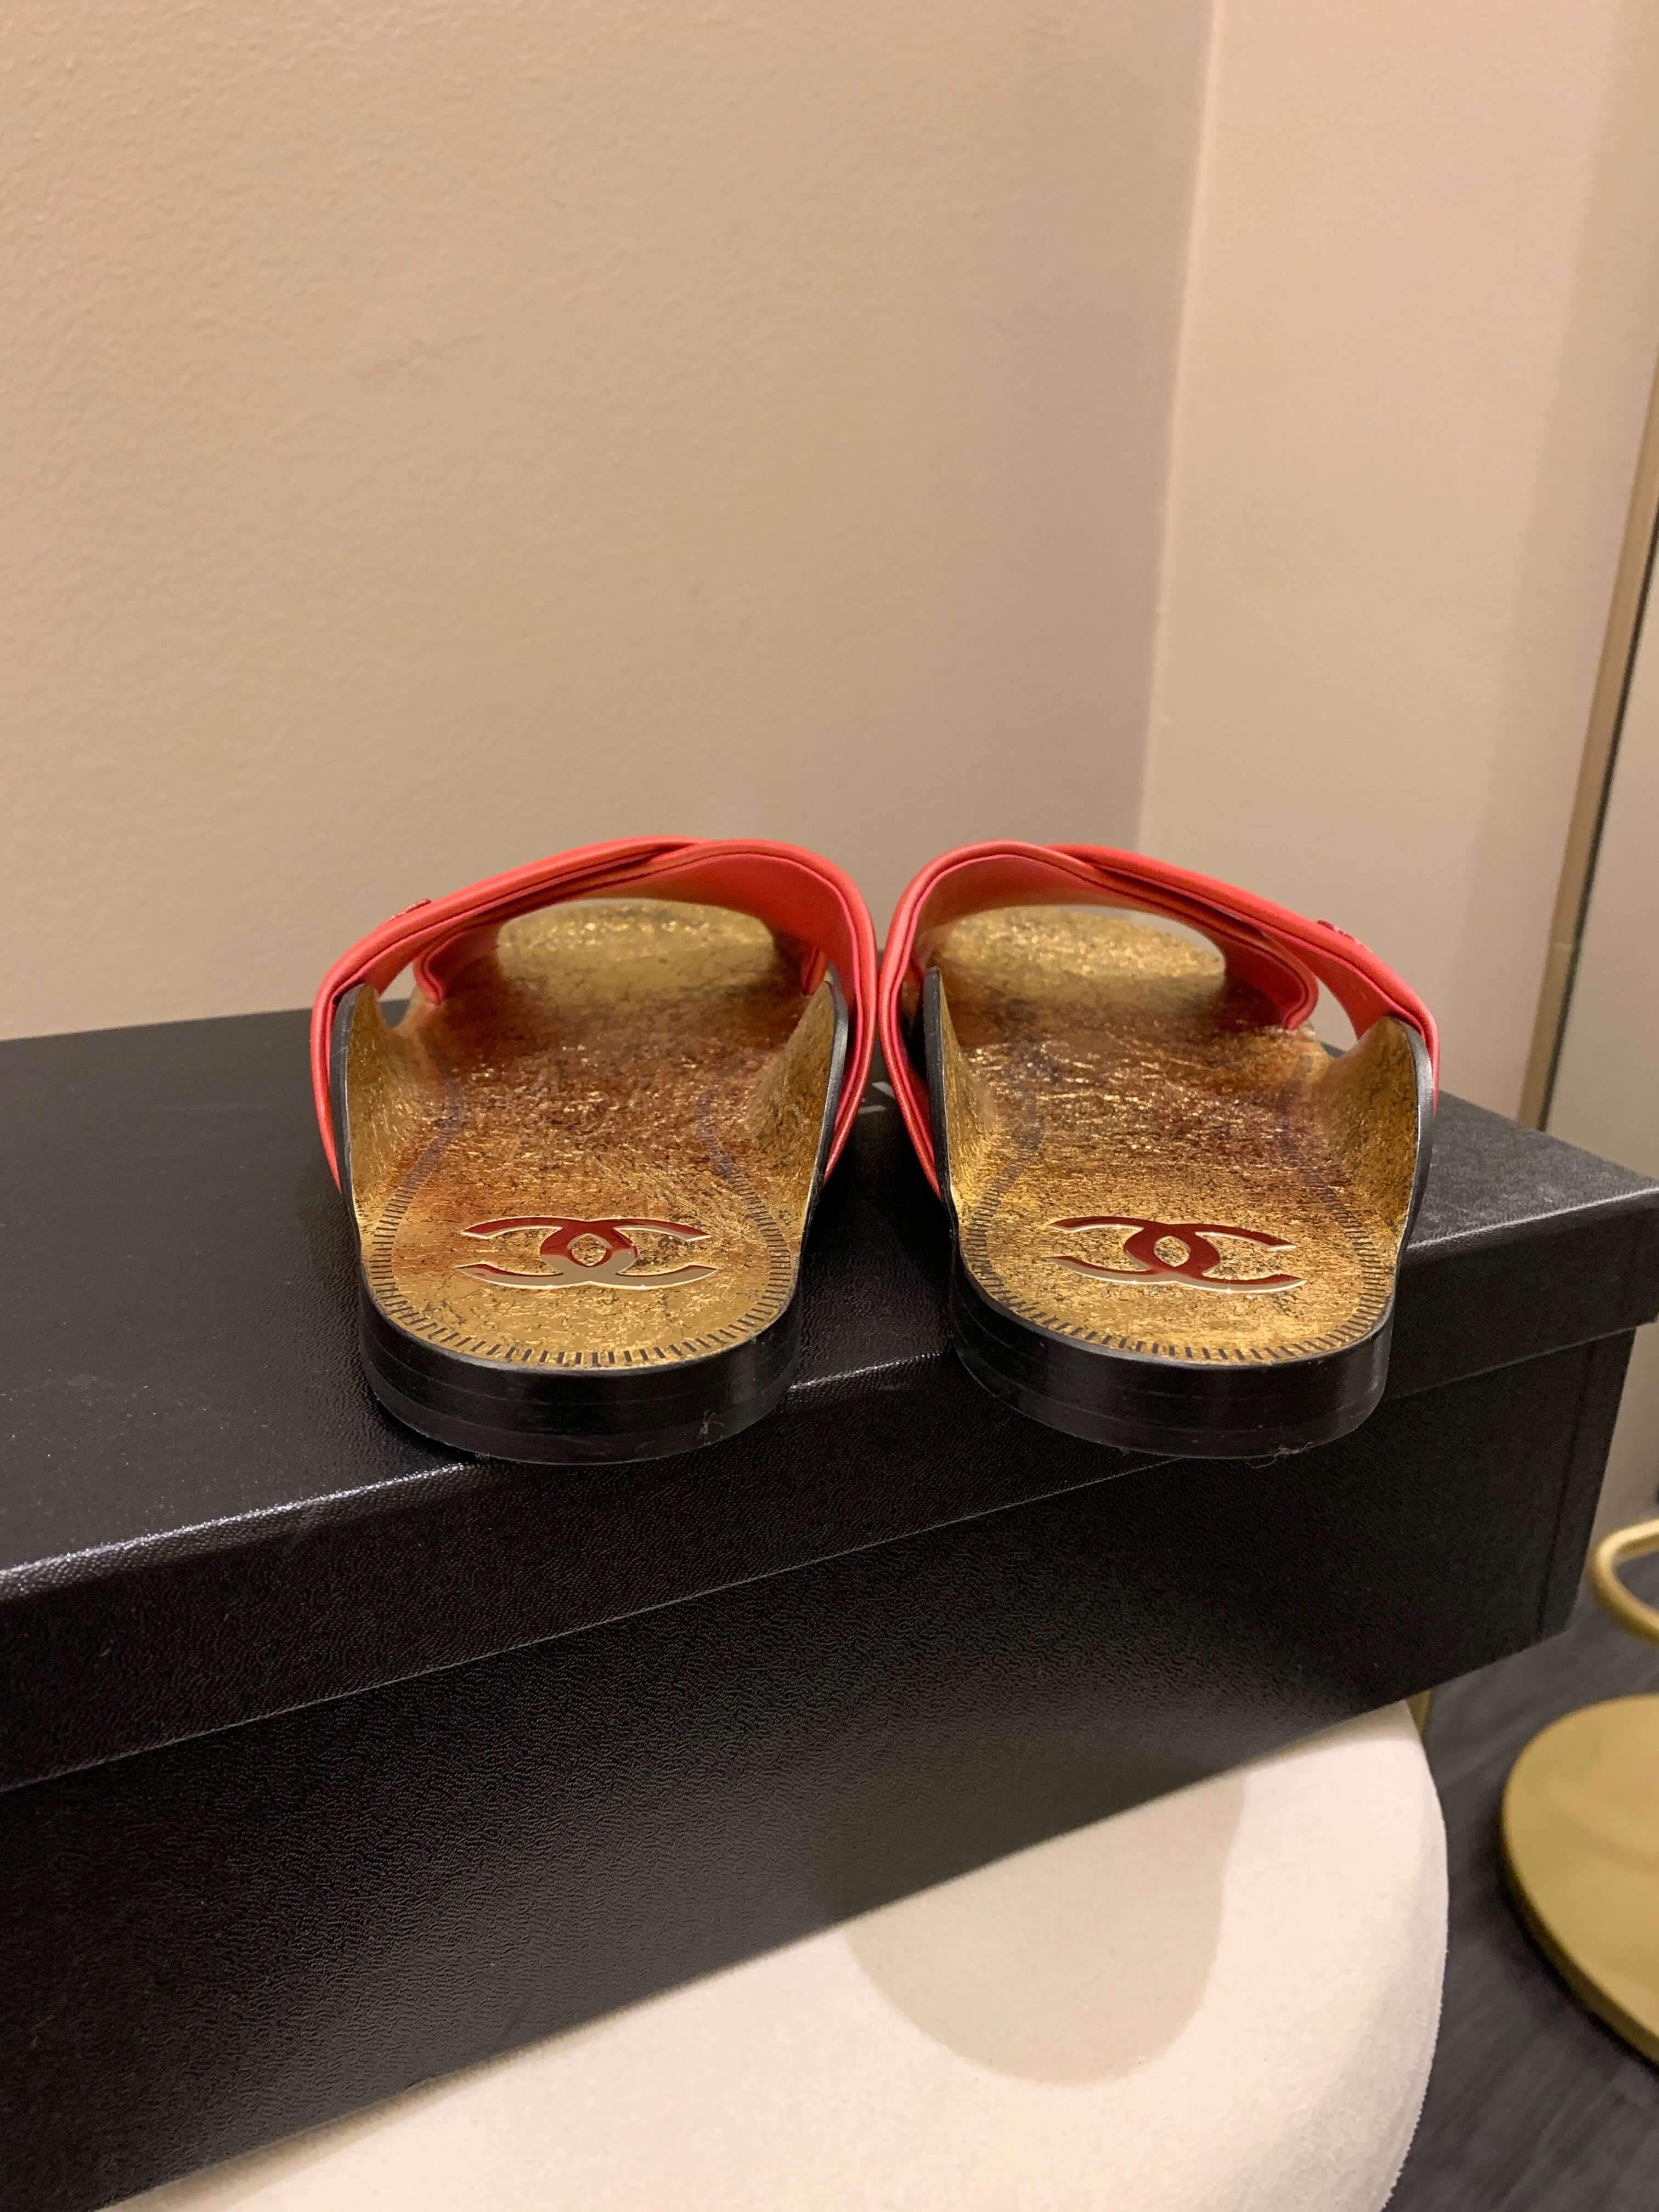 Chanel Cc Slip On Mules Red / Gold Size 38 C